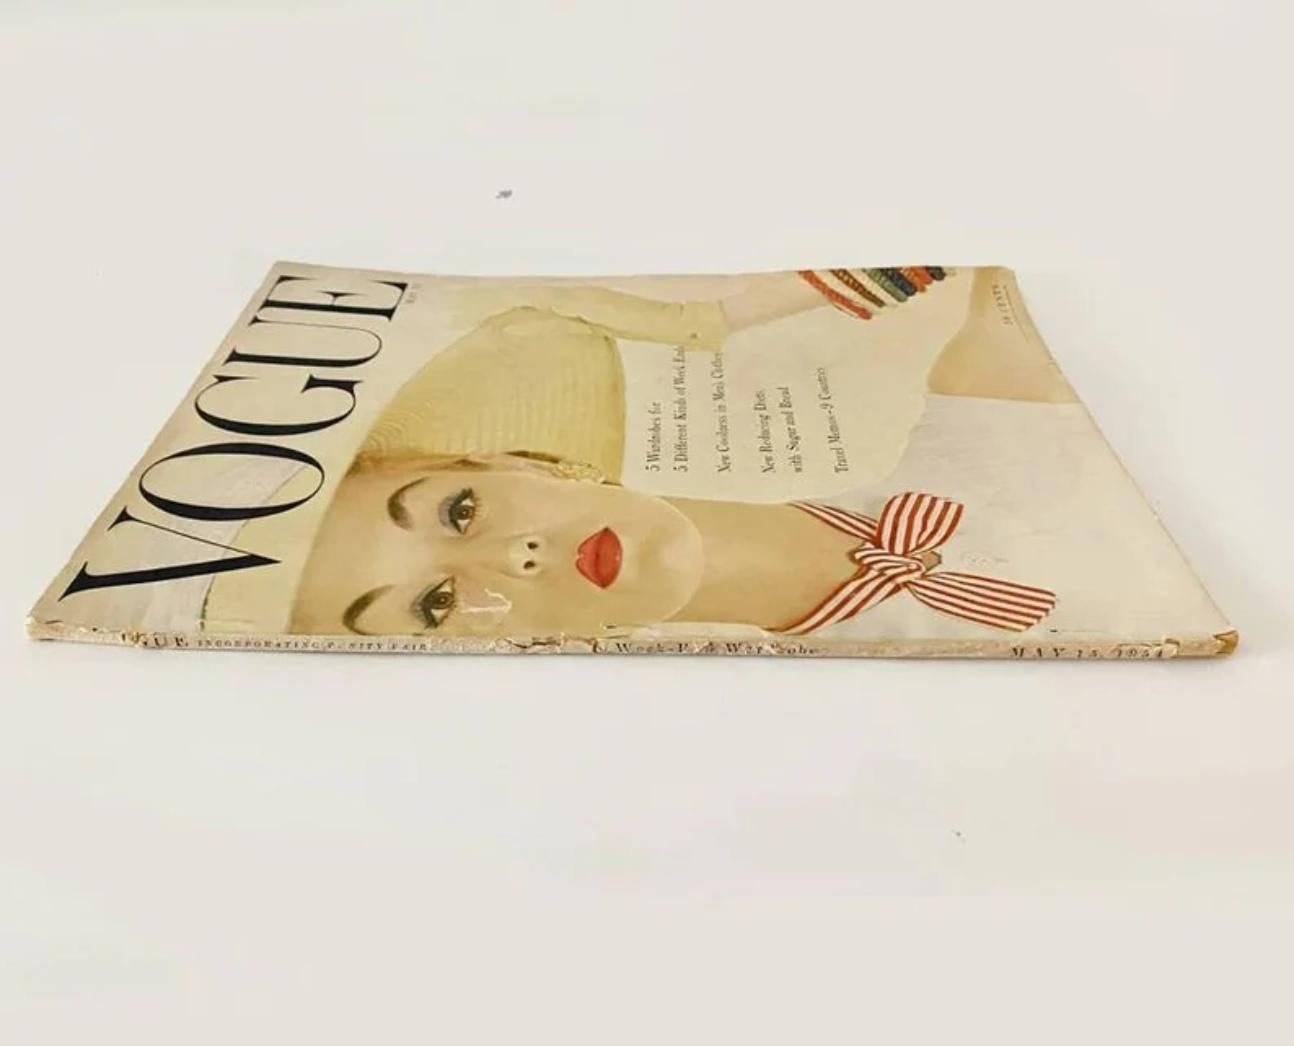 1954 VOGUE USA January, 120 pages, in colour and black/white

On Cover: Model Jean Patchett , photographed by Erwin Blumenfeld

Features: dressing summertime, Vogue living, Vogue food, Travel, Elba, Italy

Condition: vintage, 1954, the spine has